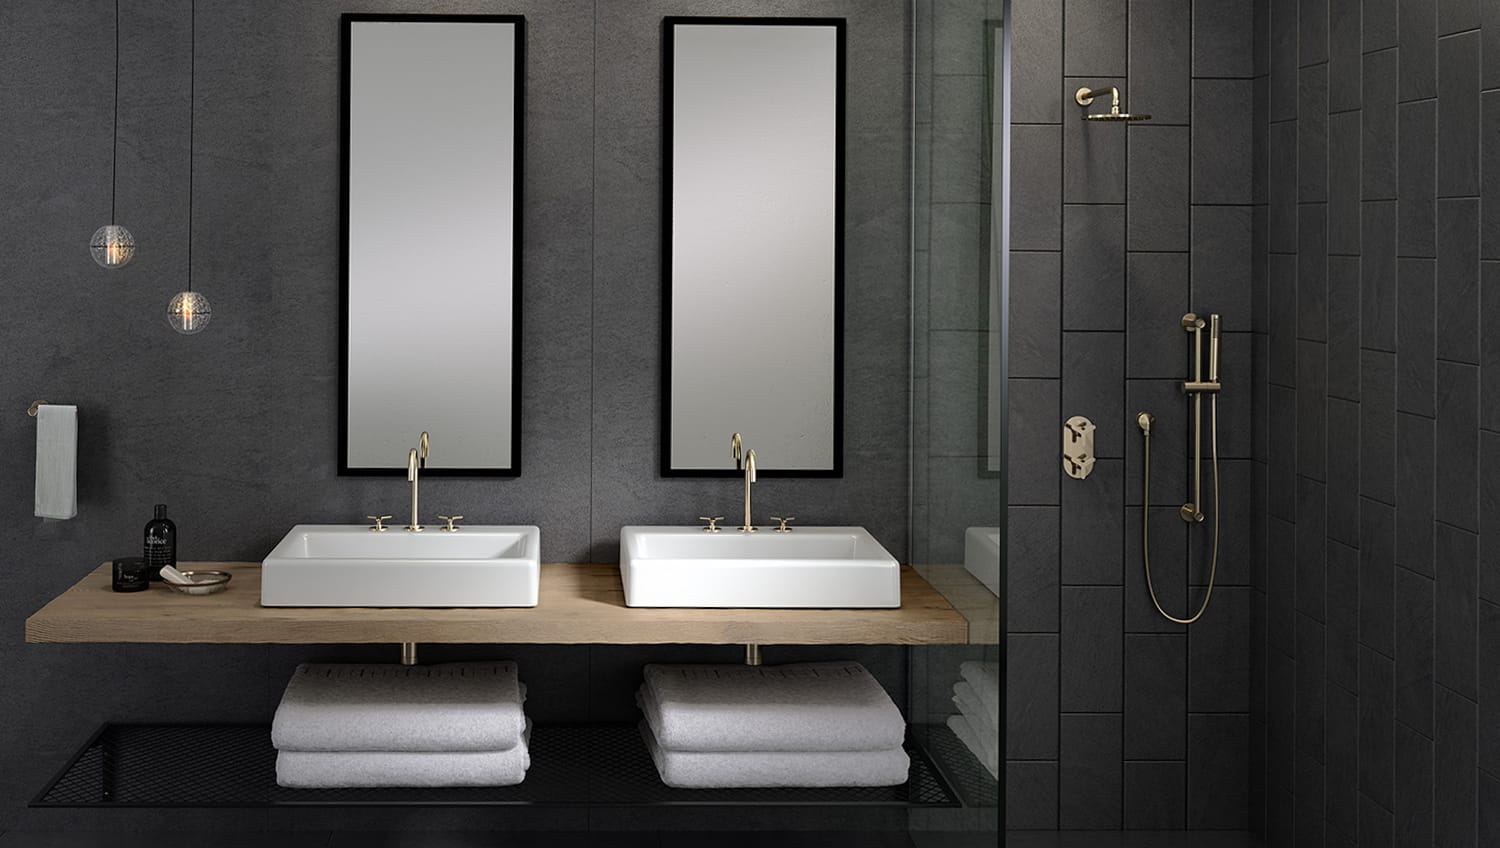 Percy Contemporary Bathroom Collection from DXV